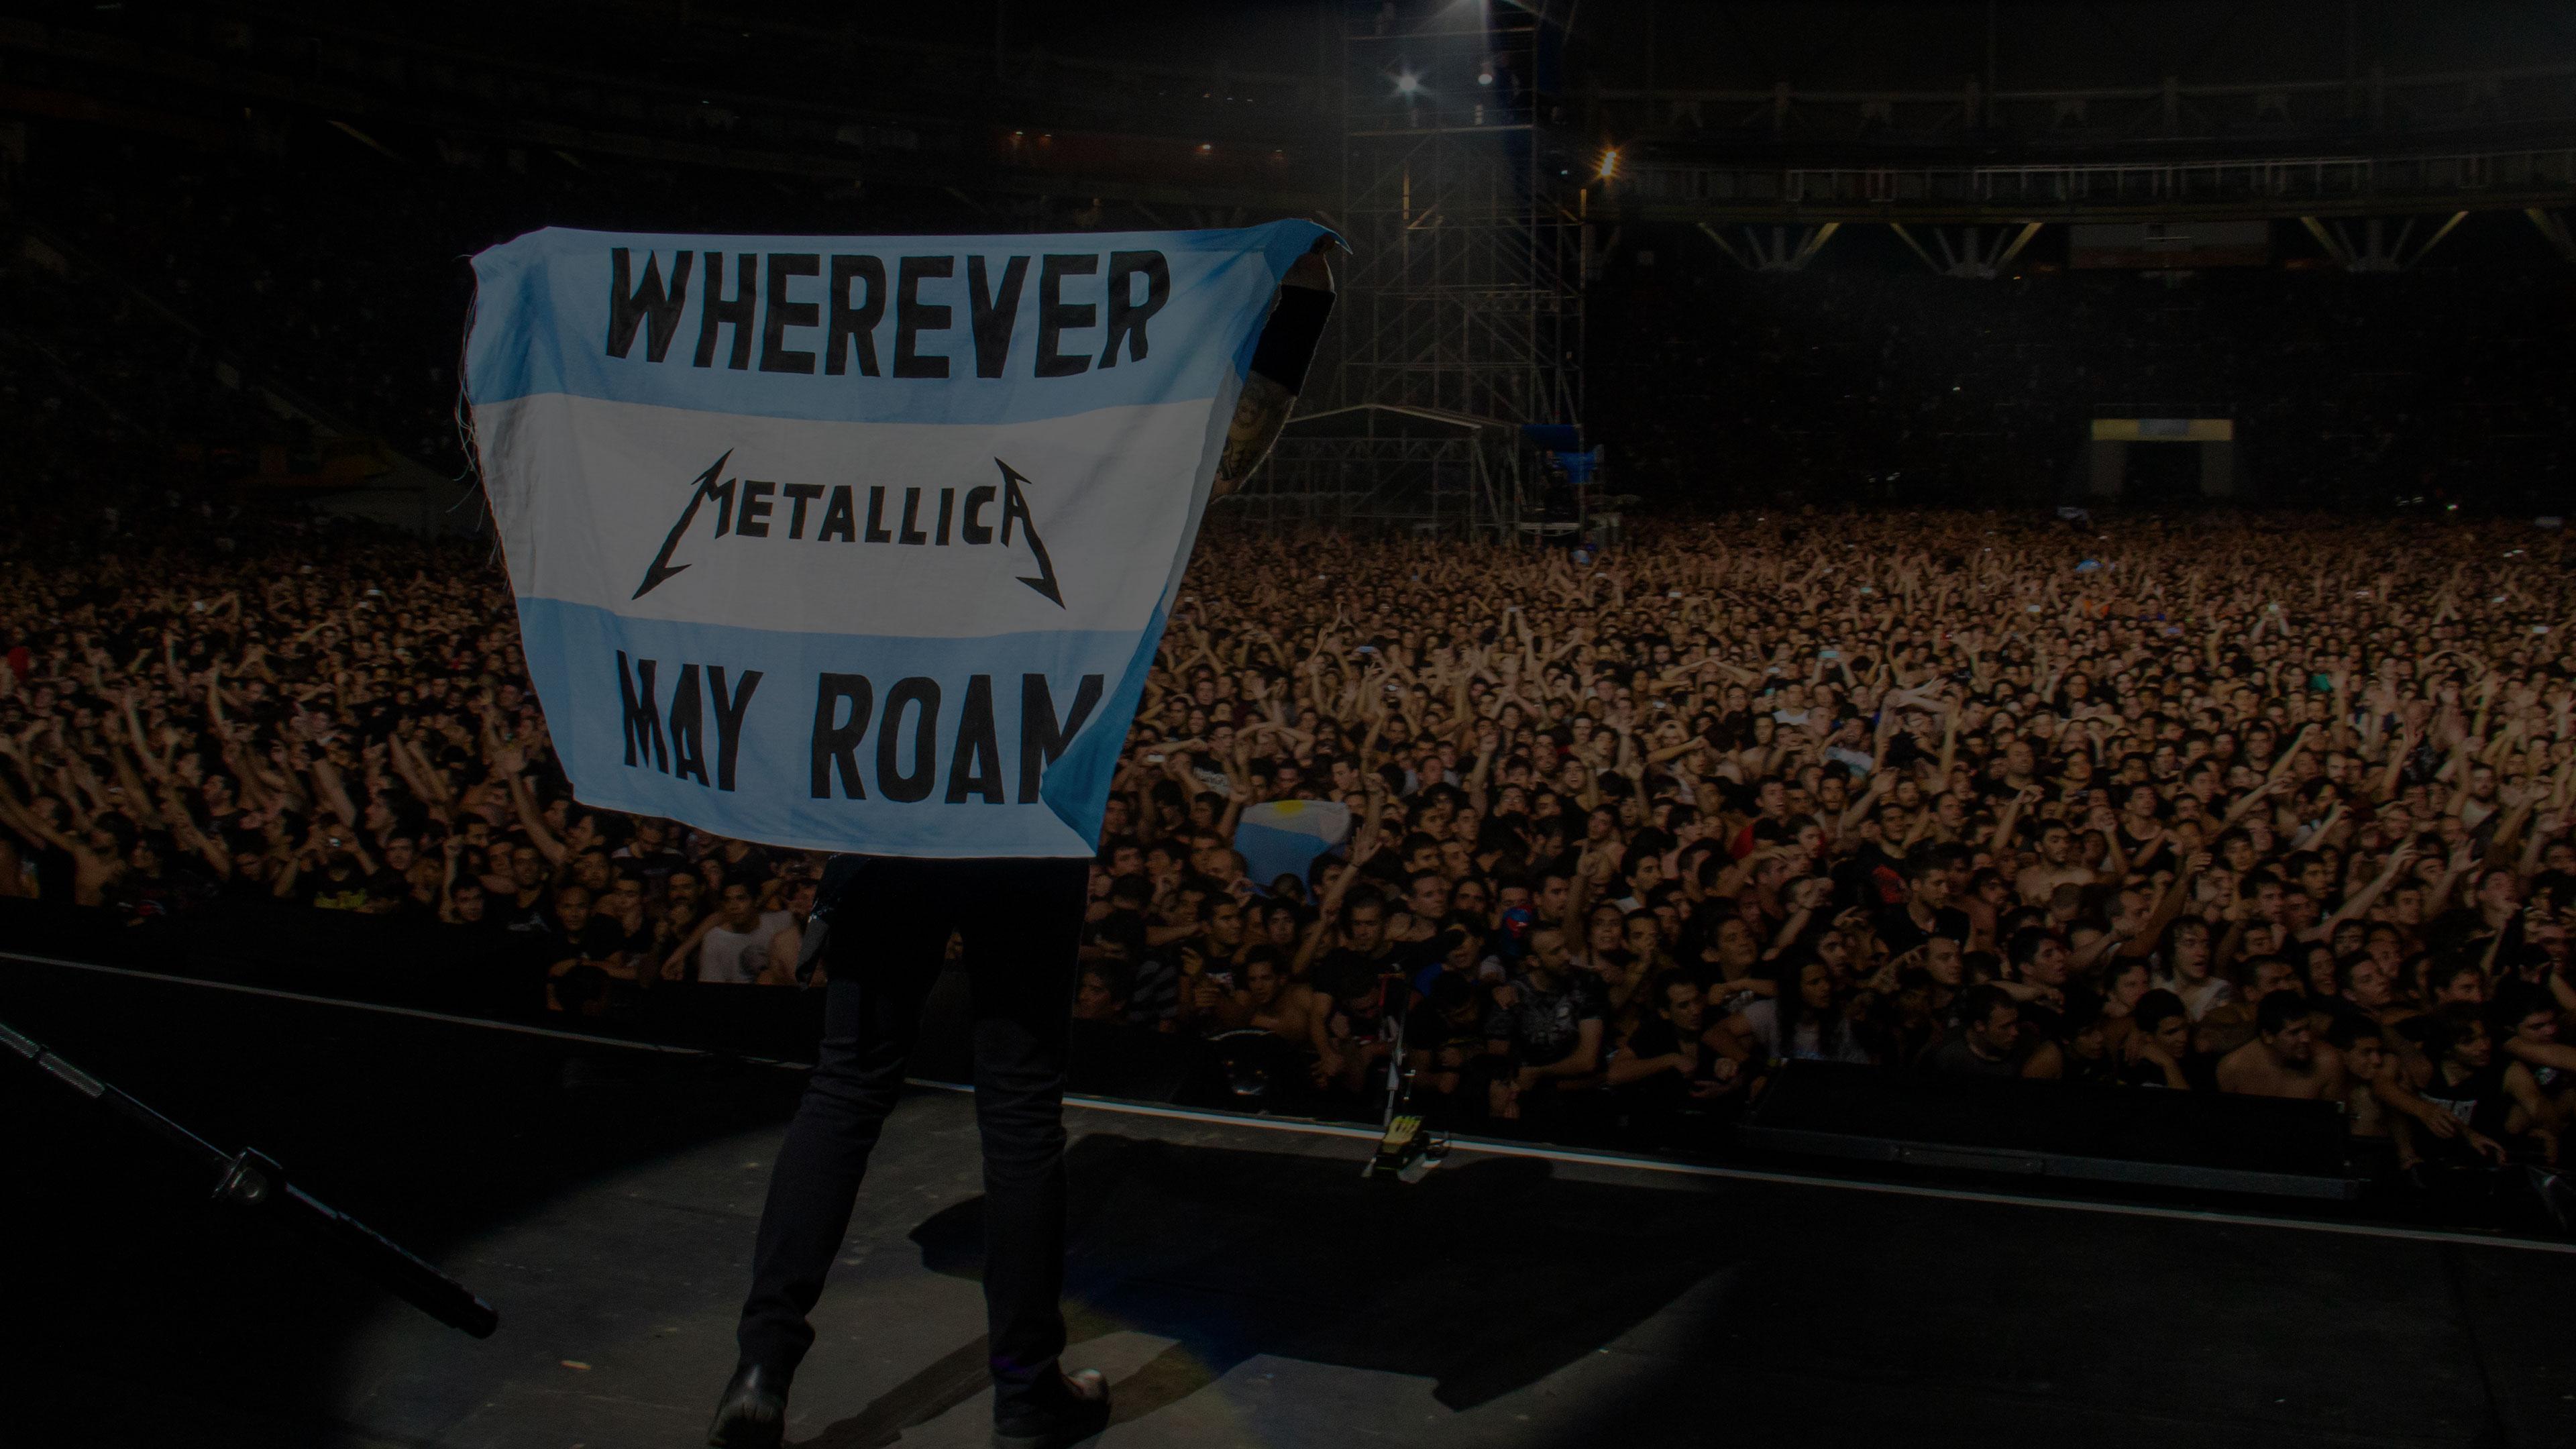 Banner Image for the photo gallery from the gig in Buenos Aires, Argentina shot on March 29, 2014